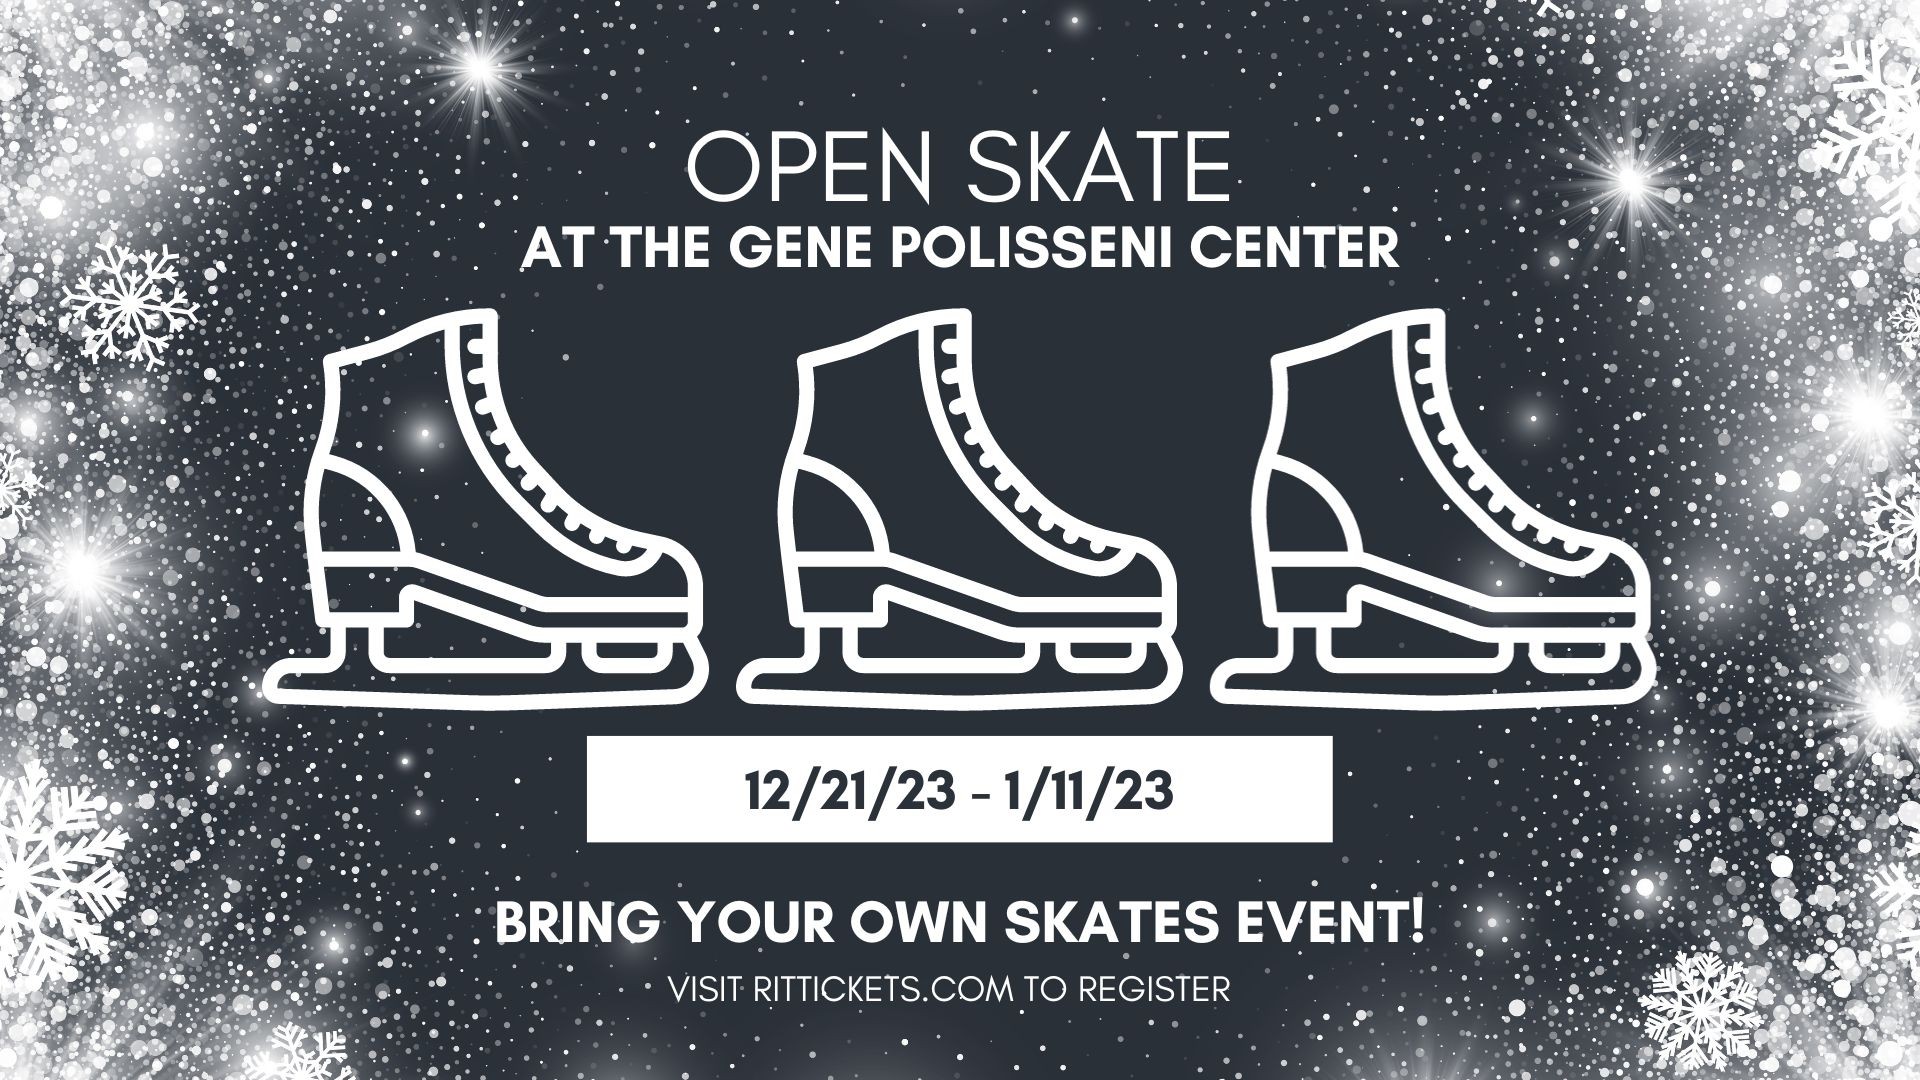 ice skates with open skate information